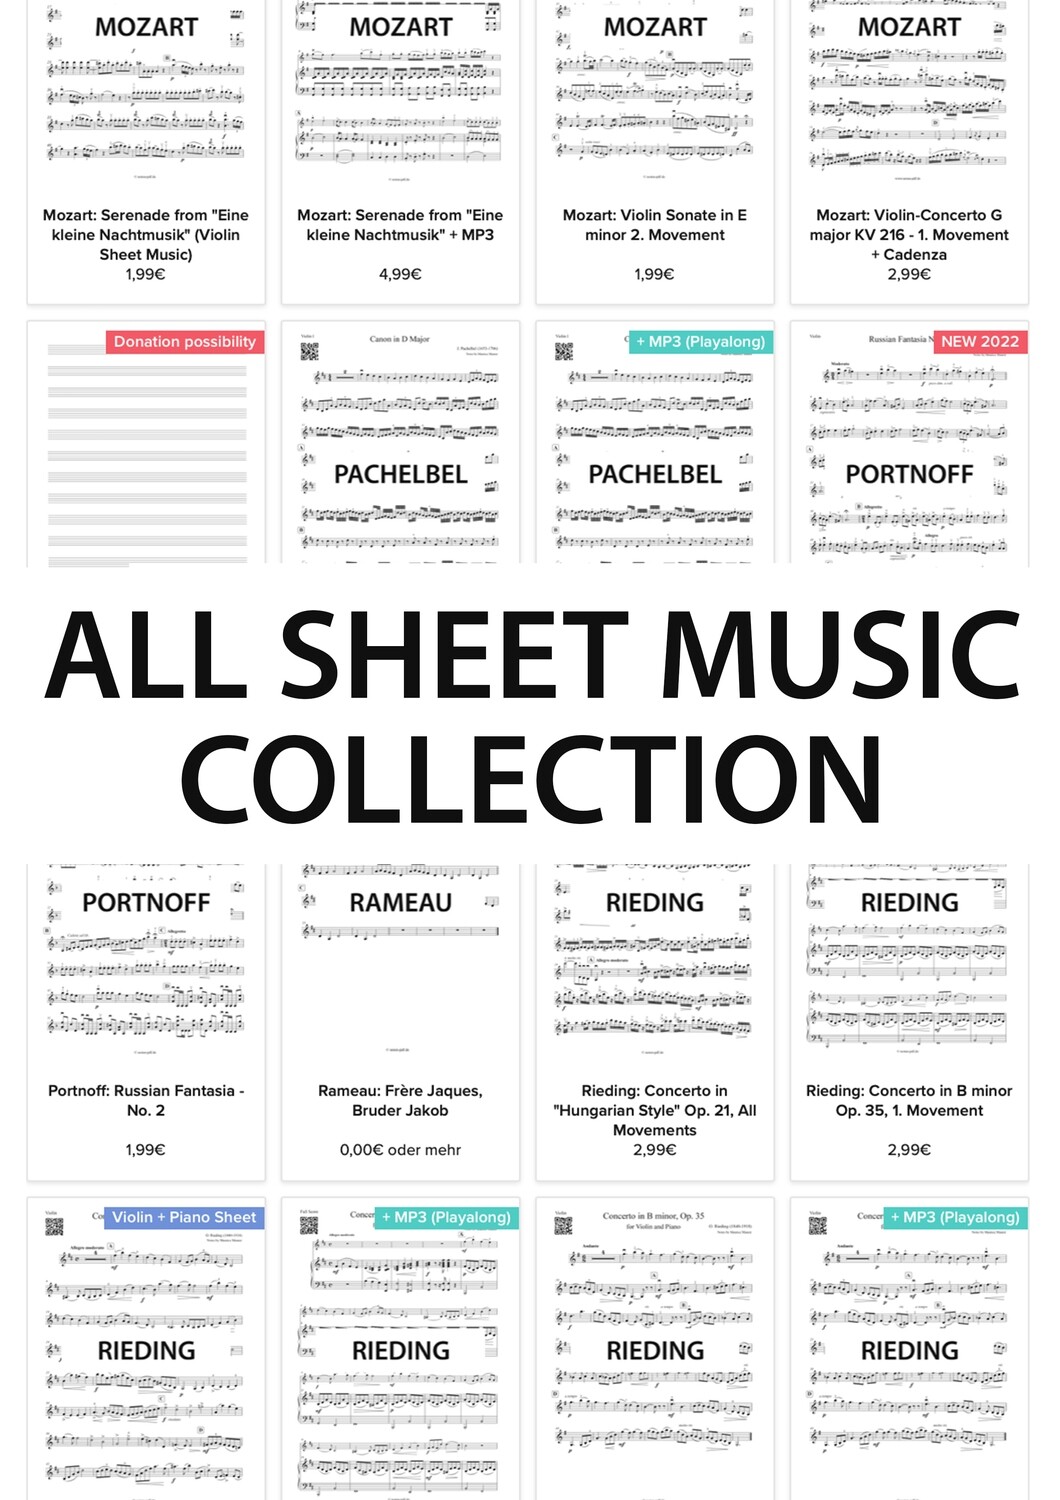 - ALL SHEET MUSIC COLLECTION -